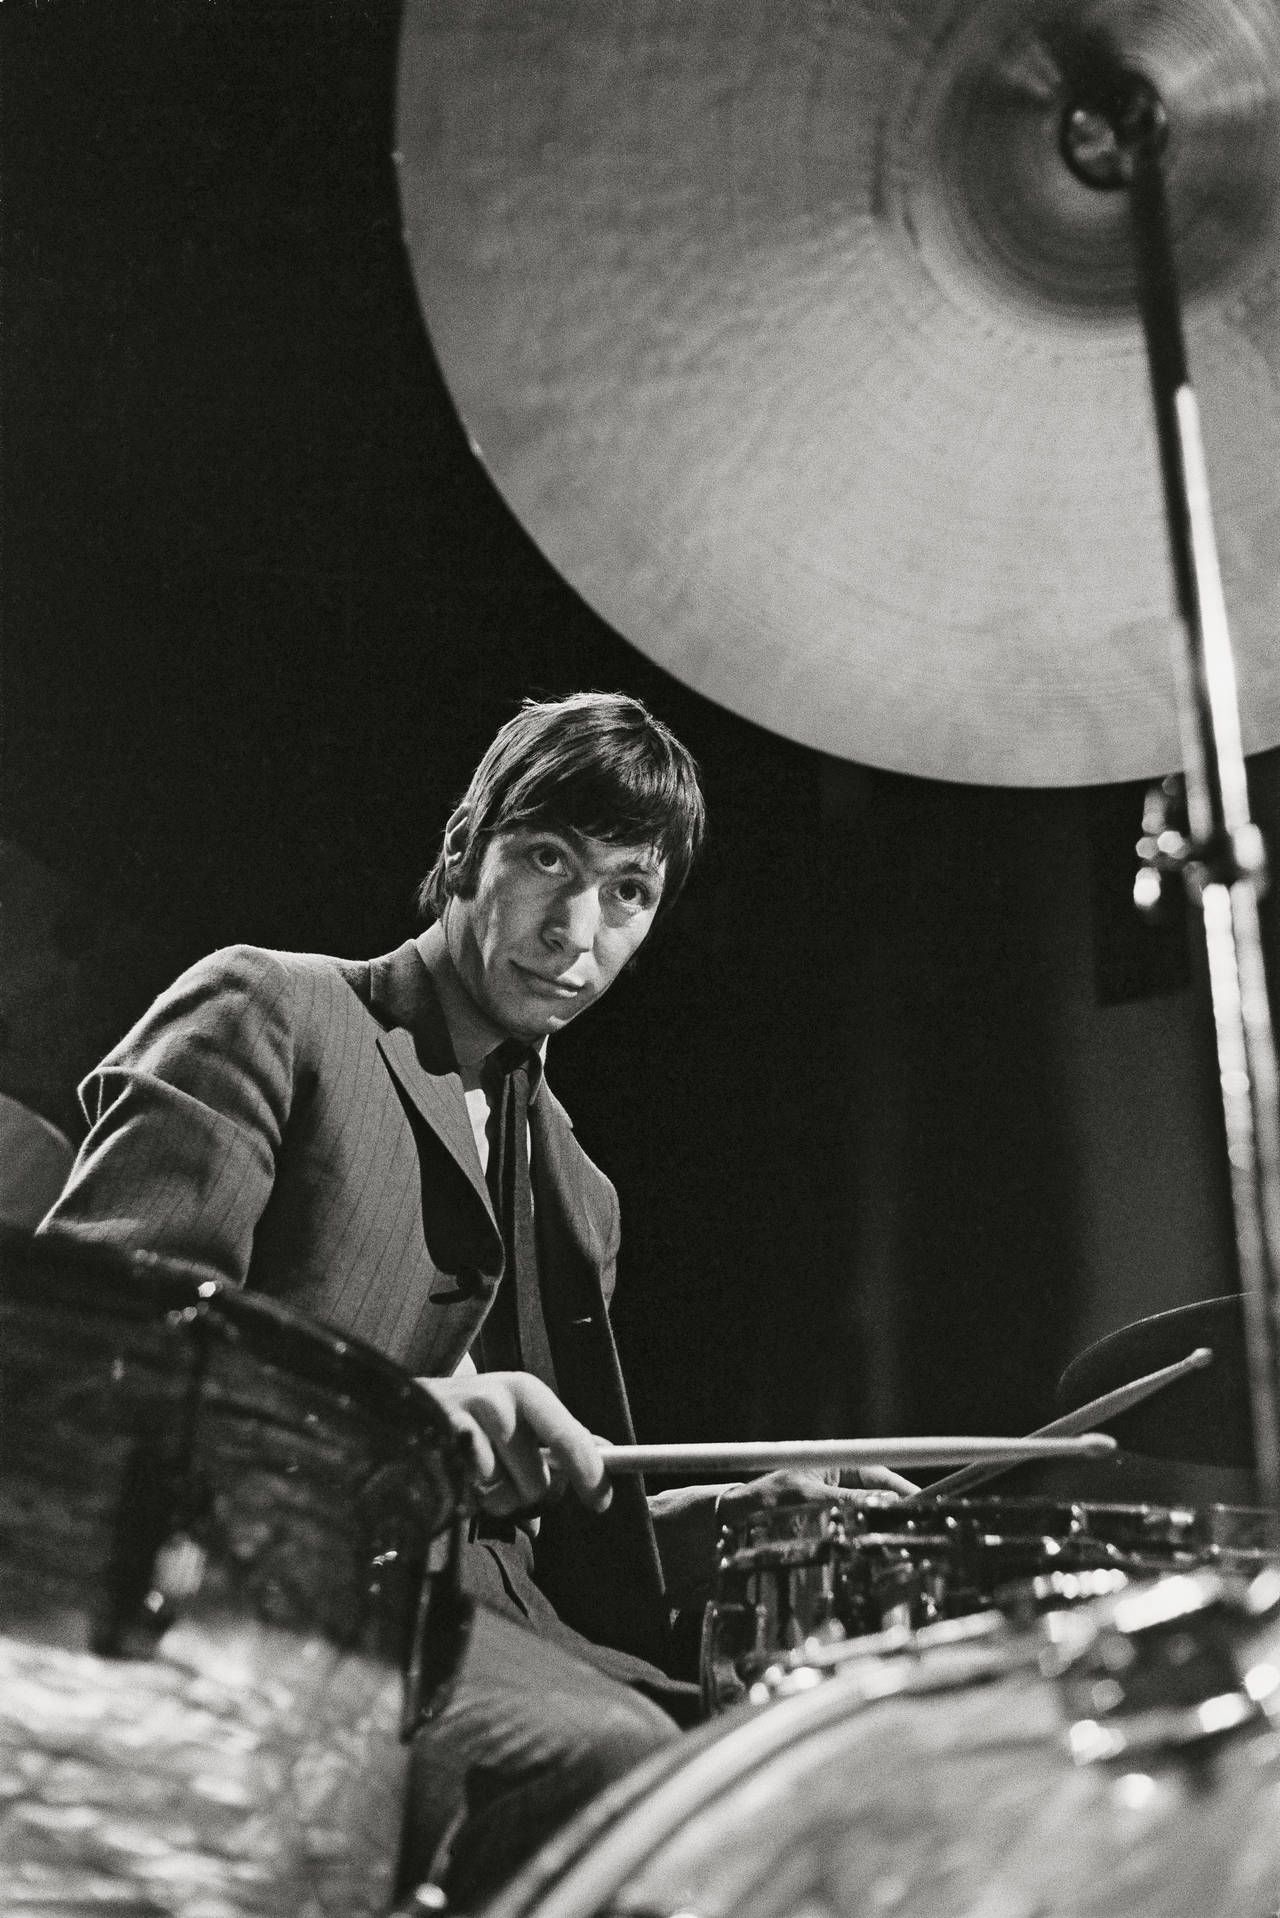 Happy 78th birthday to the heartbeat of the Stones, Charlie Watts. 